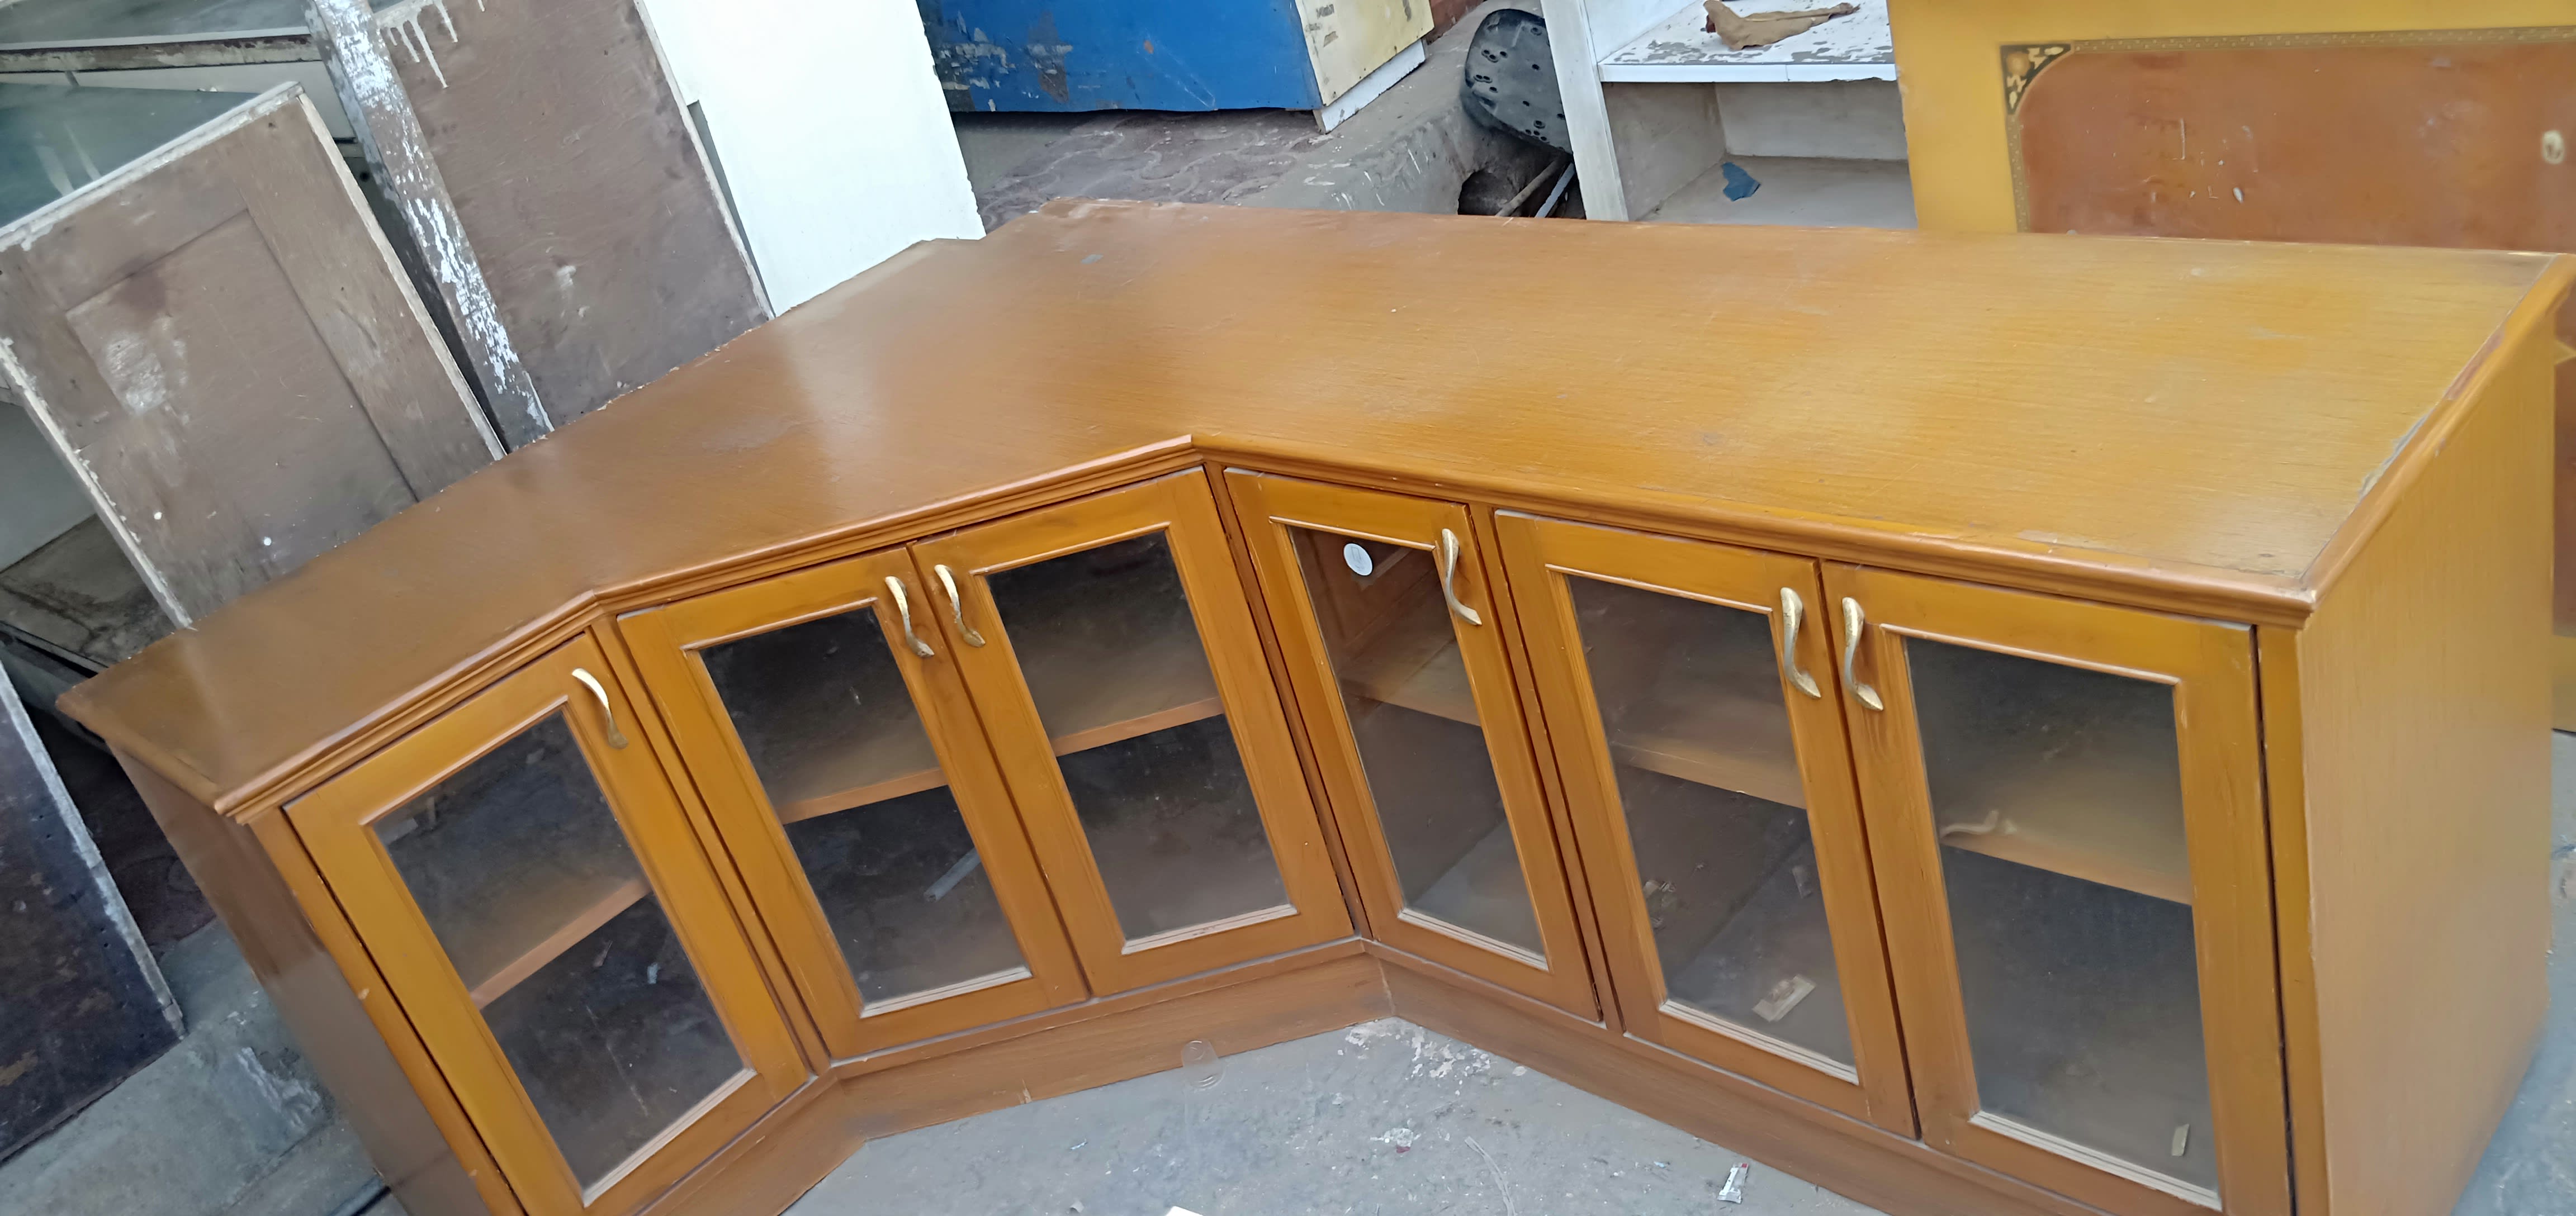 Second Hand Furniture Buy Sale Furniture Store Services